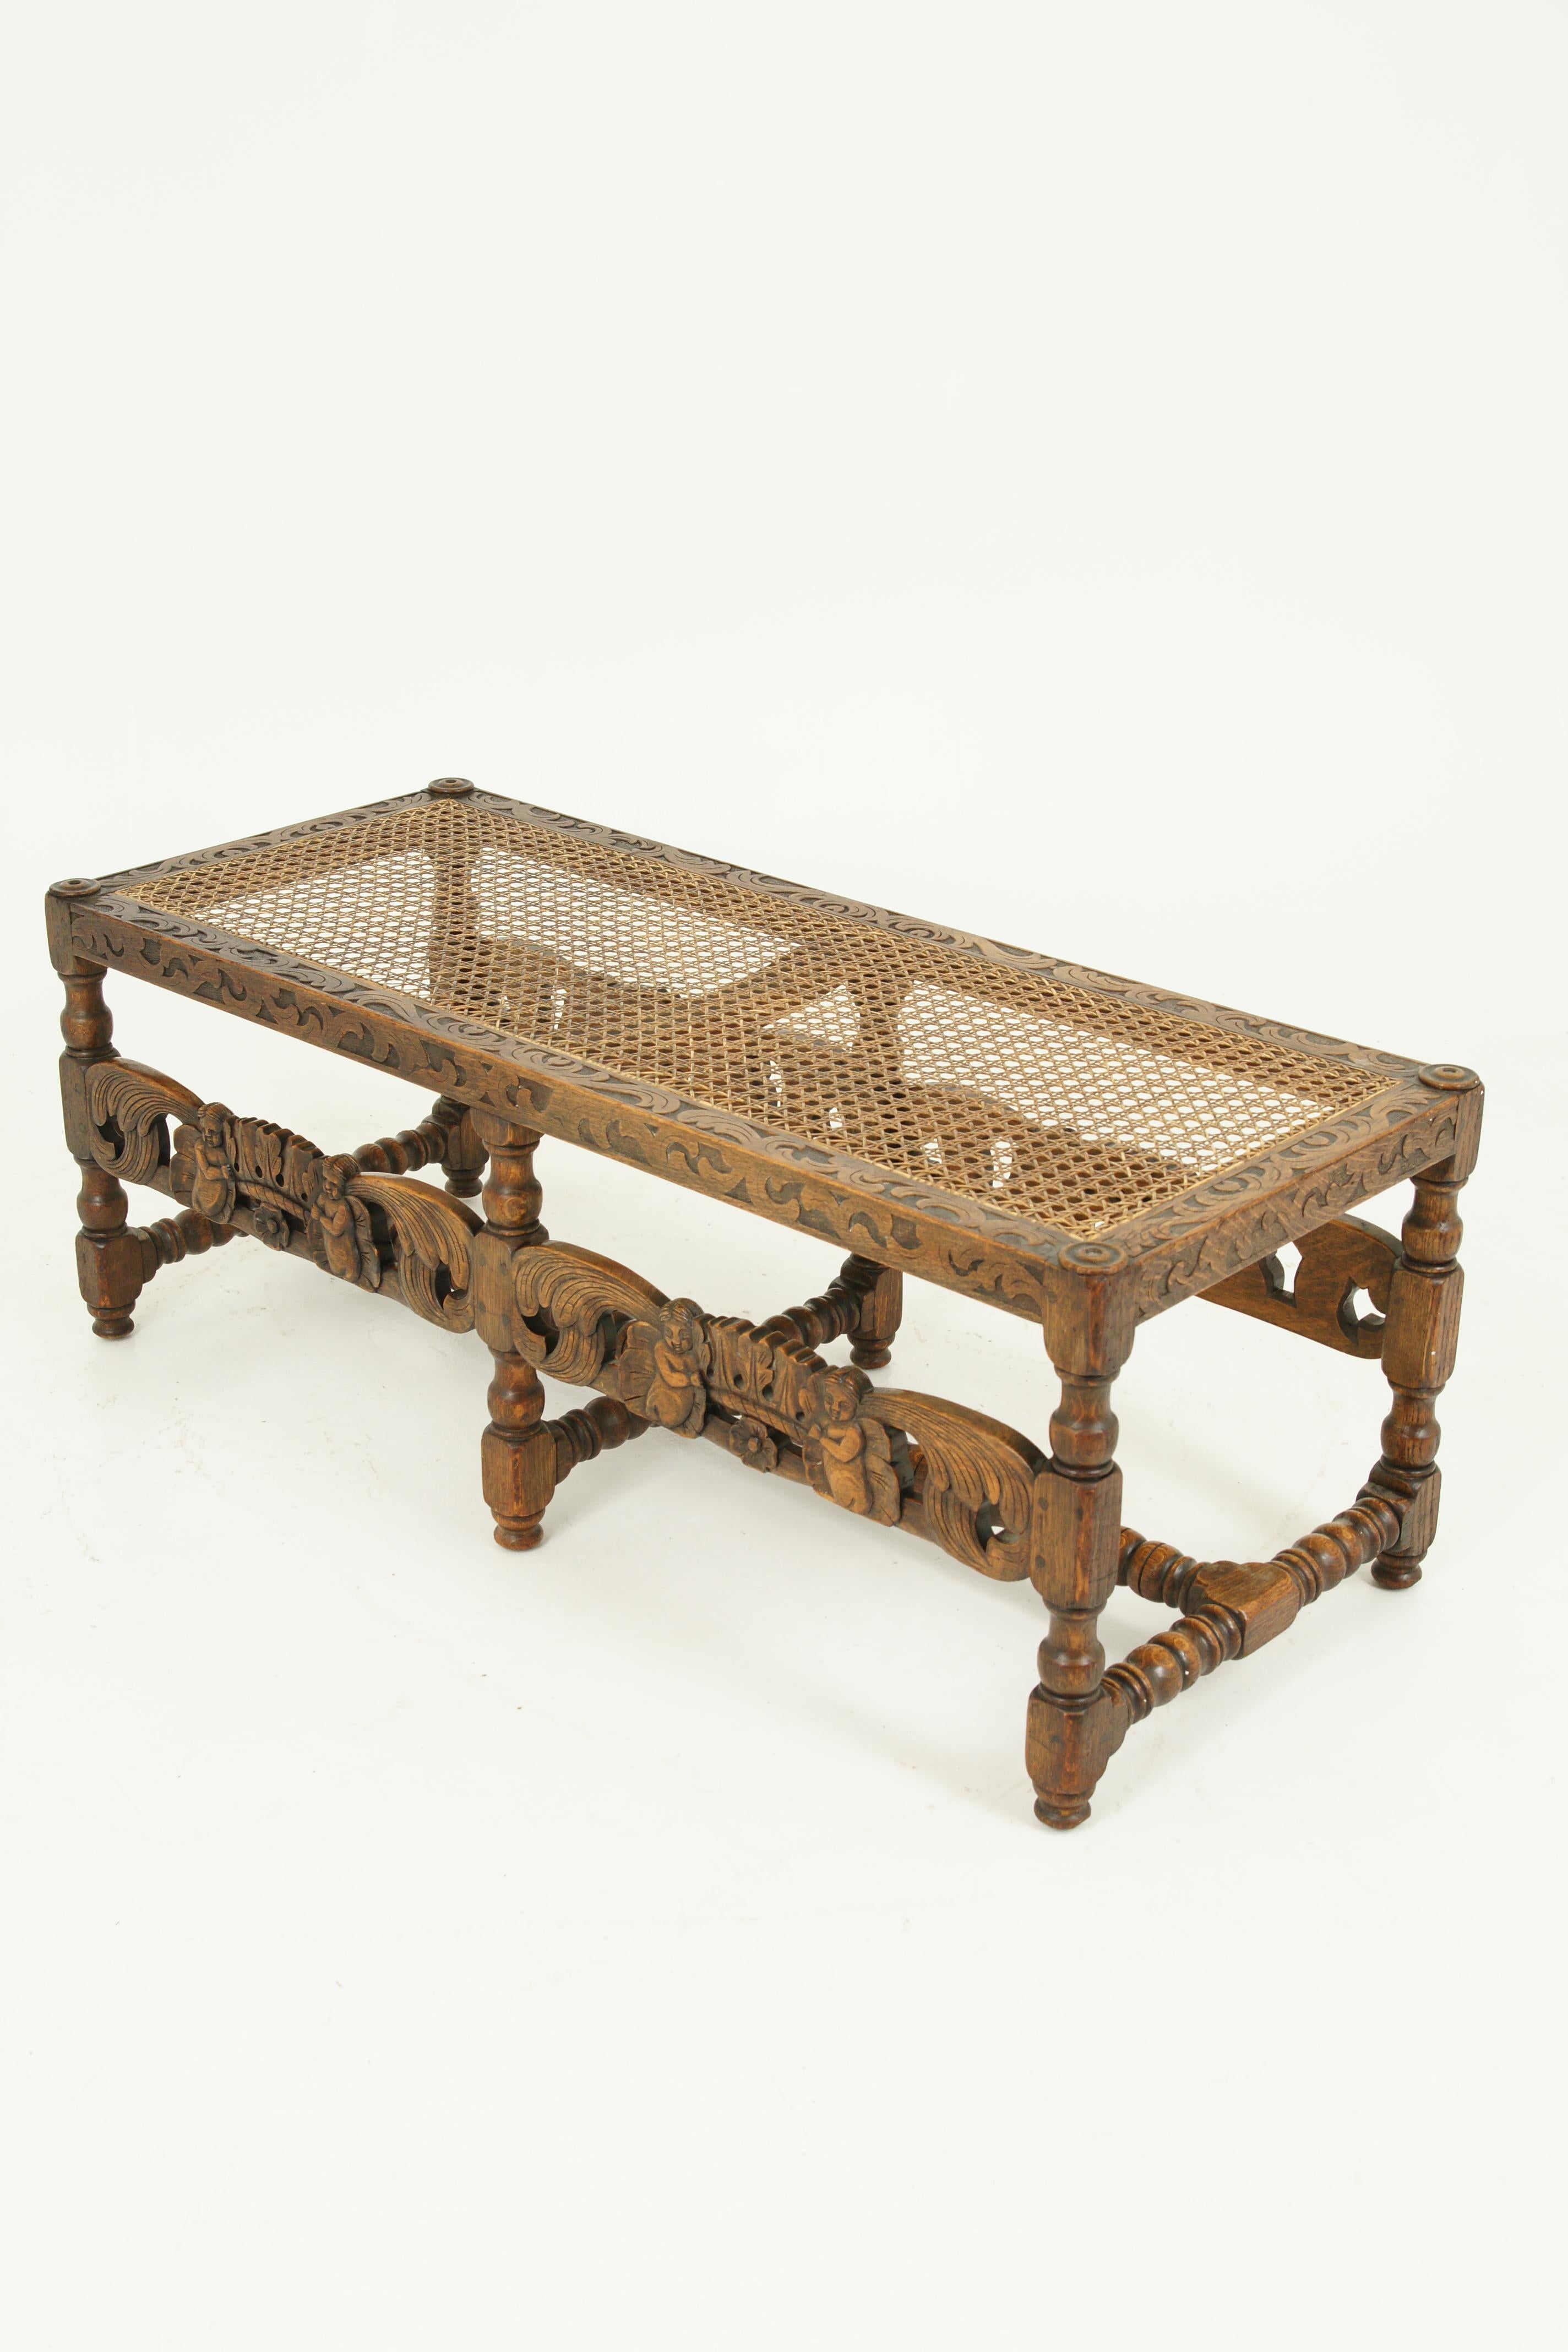 Early 20th Century Antique Carved Bench, Footstool, Window Seat, Heavily Carved, W&J Sloane, B1609